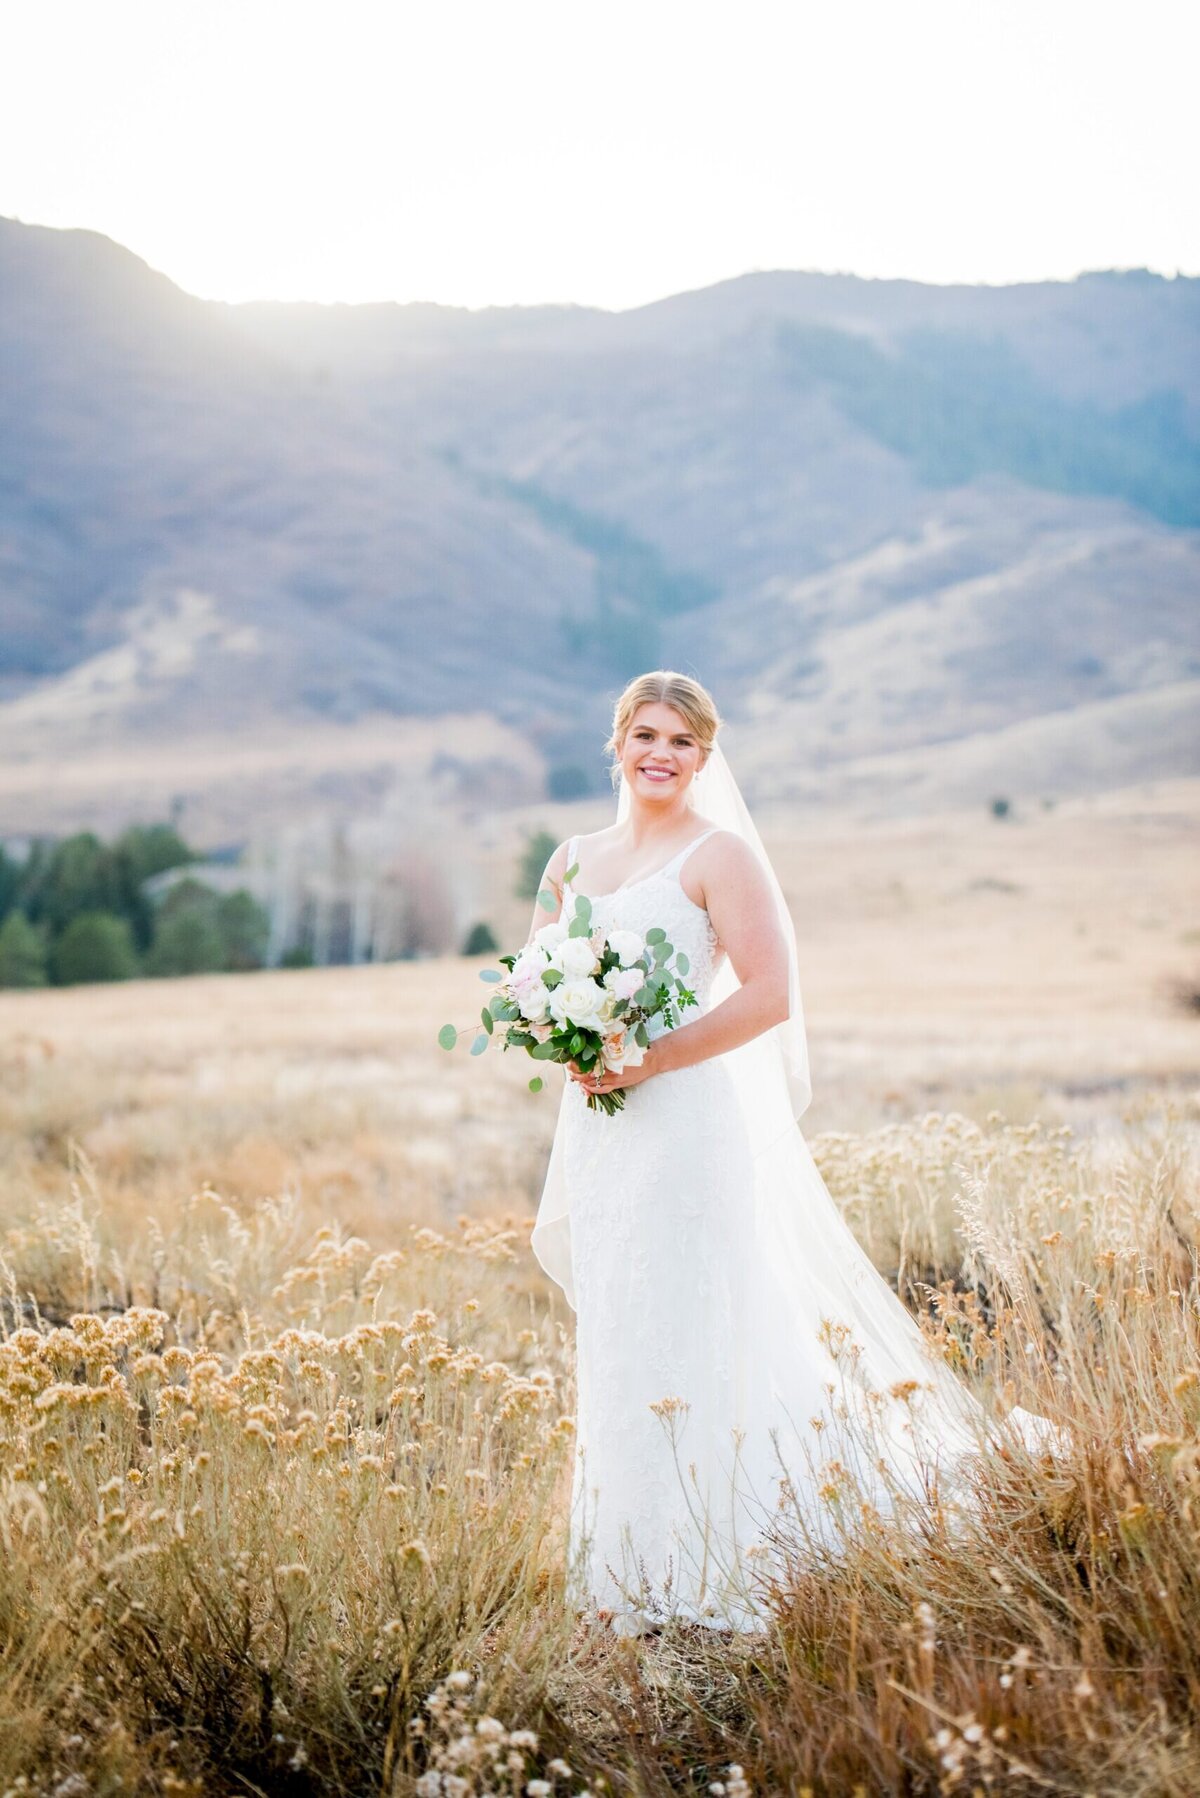 A bride holding her bouquet stands in a golden field and smiles at the camera at her wedding at The Manor House in Littleton, Colorado.